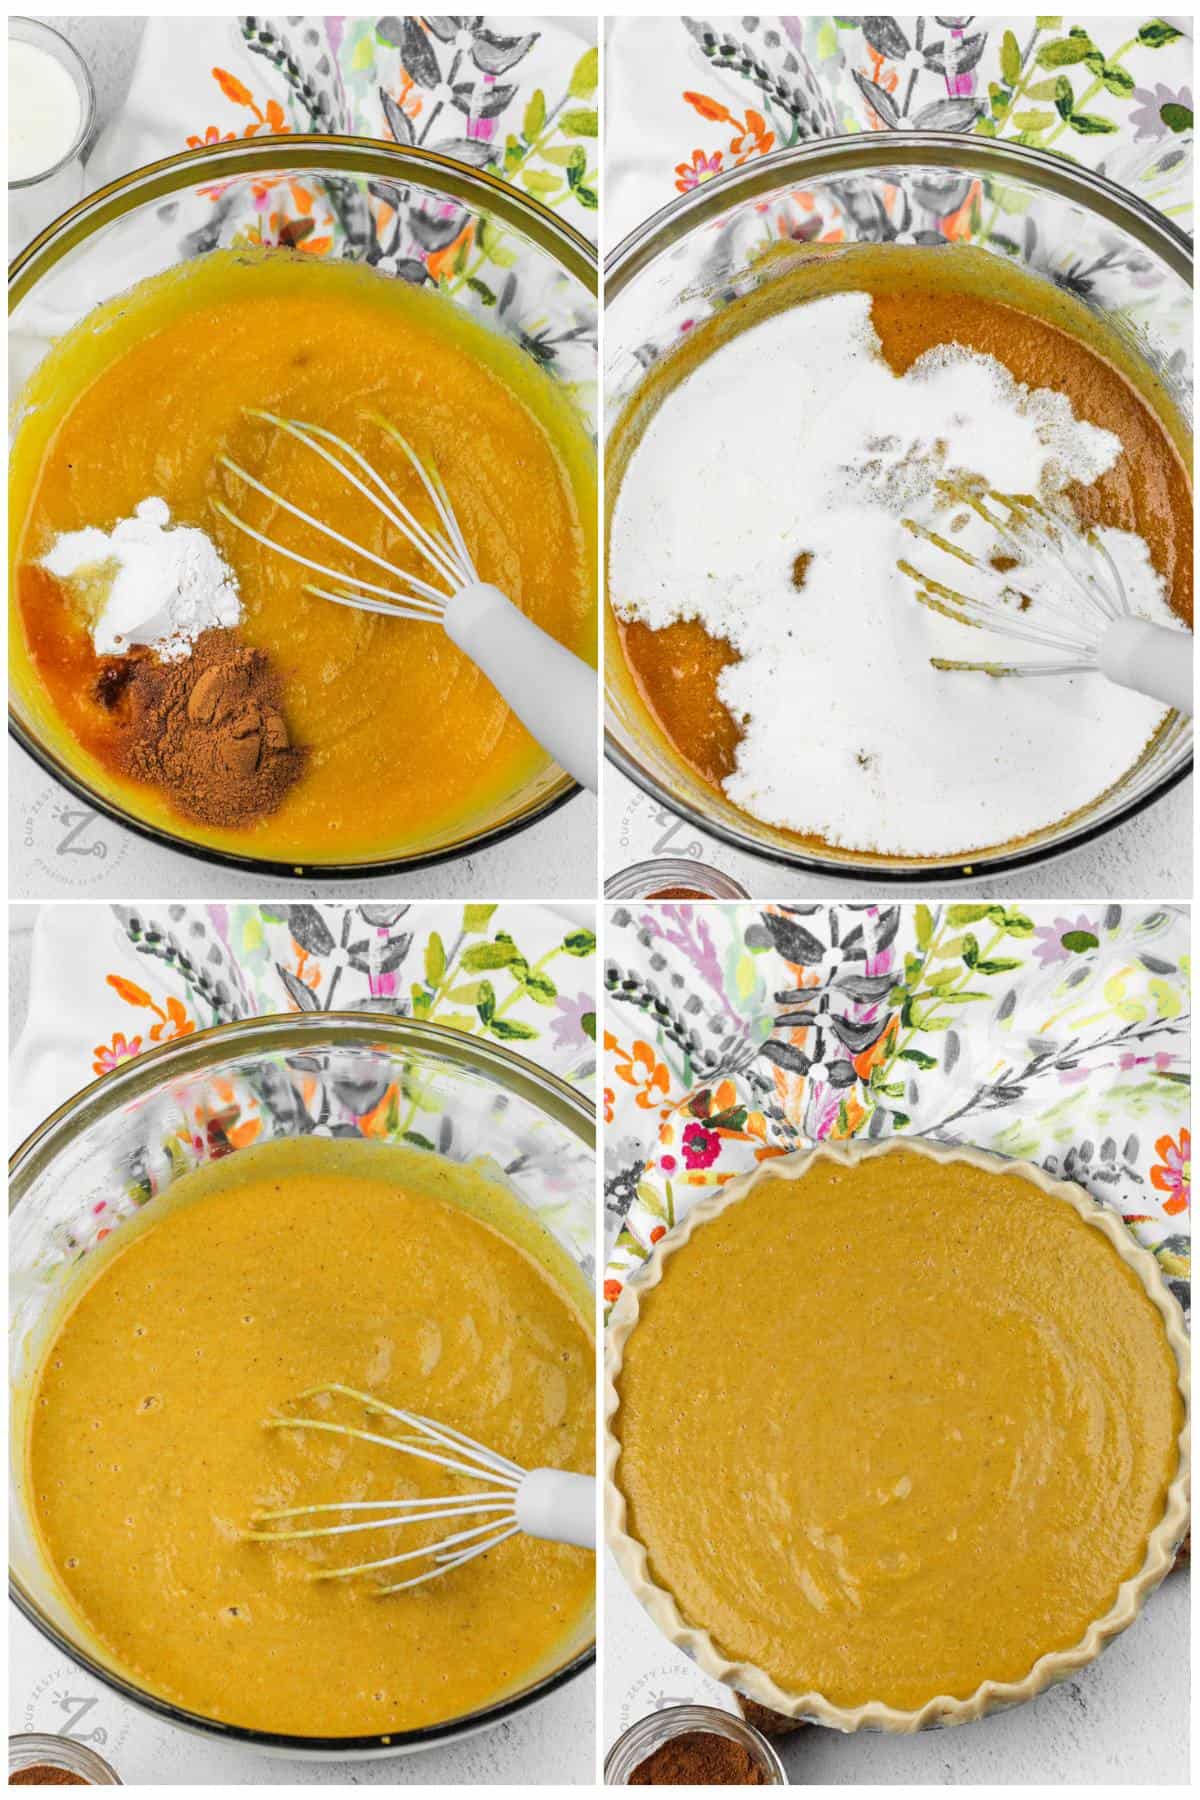 process of adding seasonings and milk to pumpkin filling and adding to pie shell to make Pumpkin Pie from Fresh Pumpkin